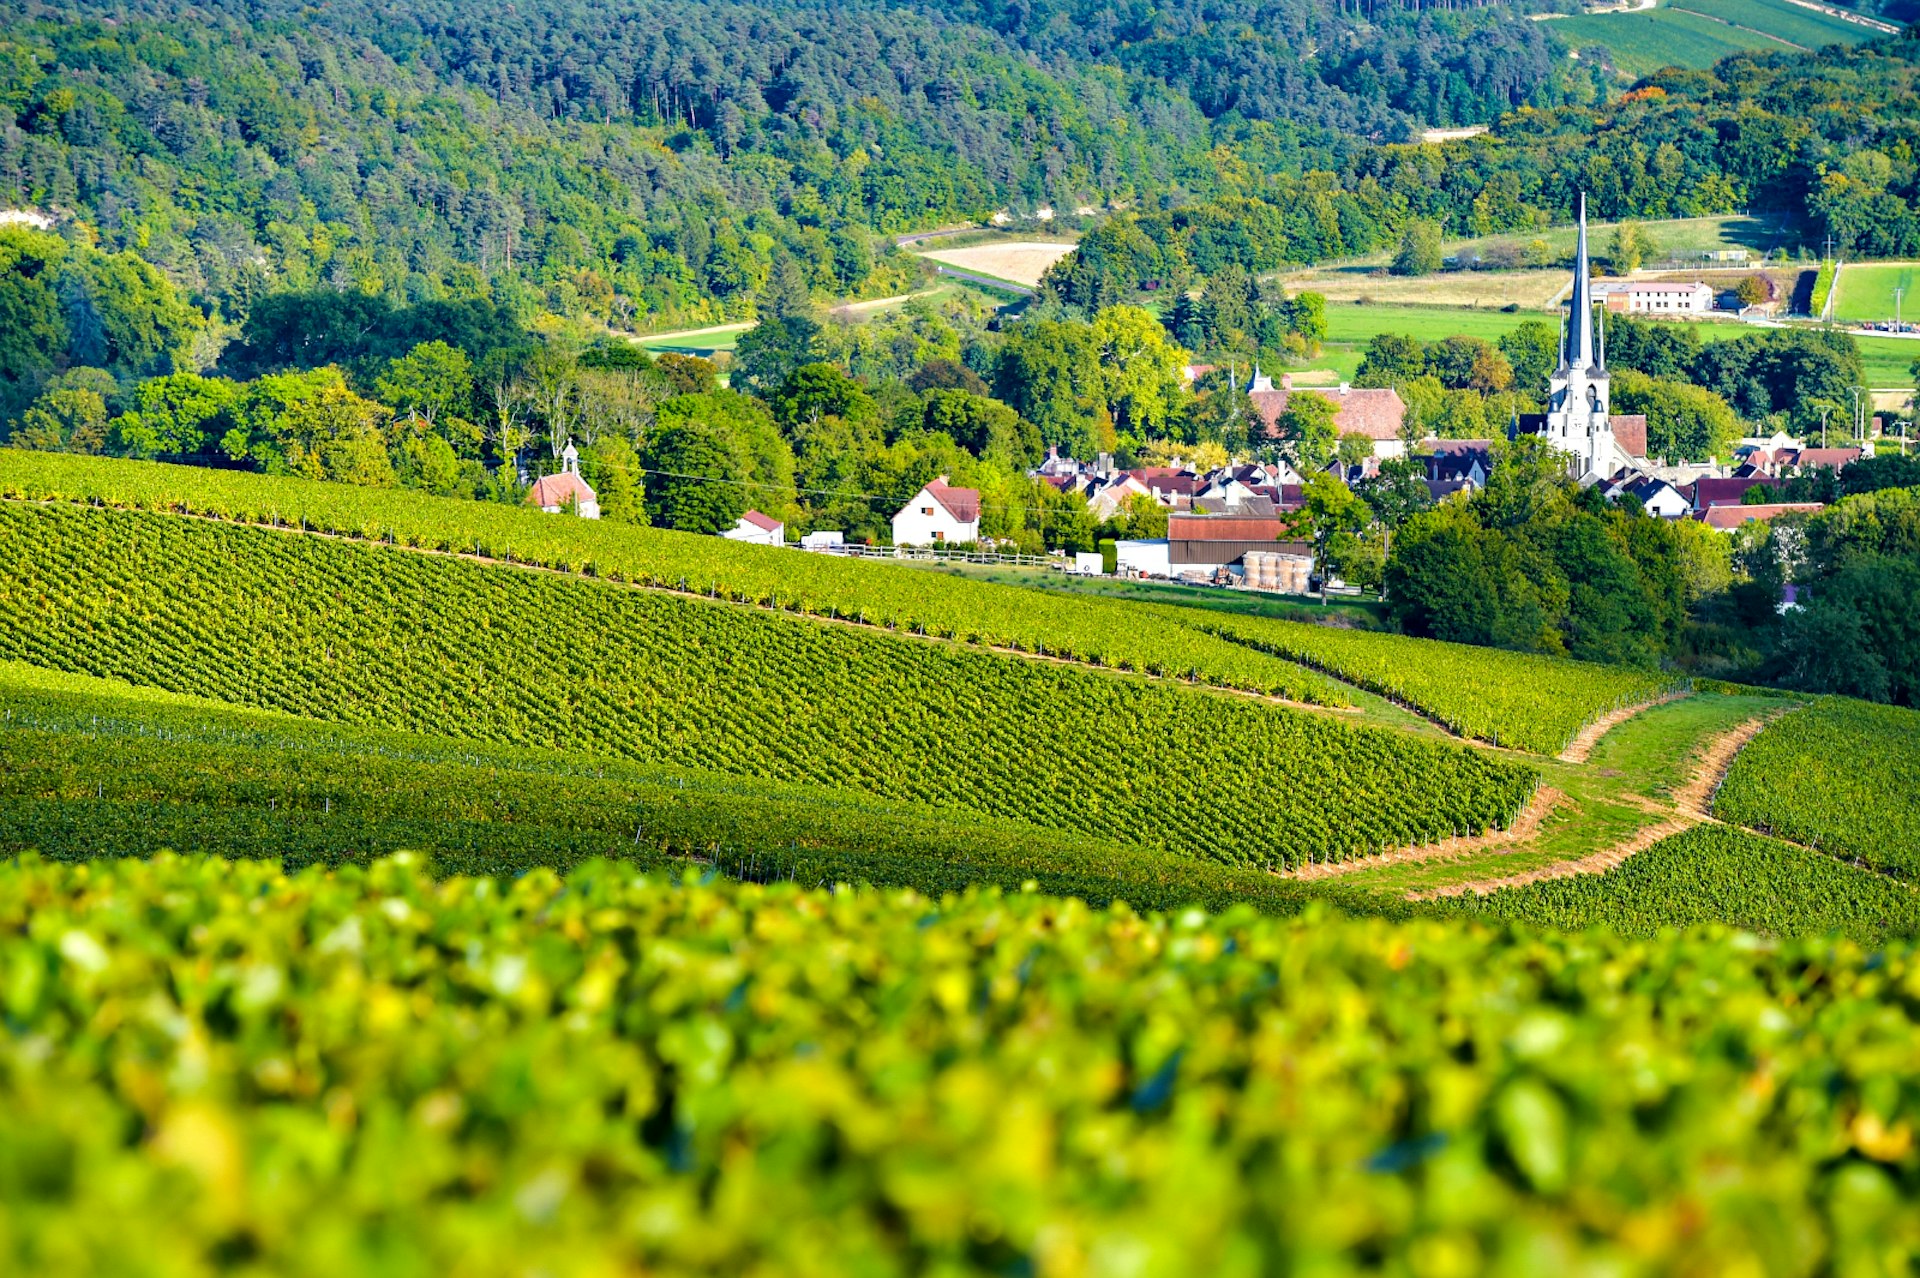 Rolling hills of green vineyards with a small town in the background. A steeple rises out from a town and there is thick forest further back